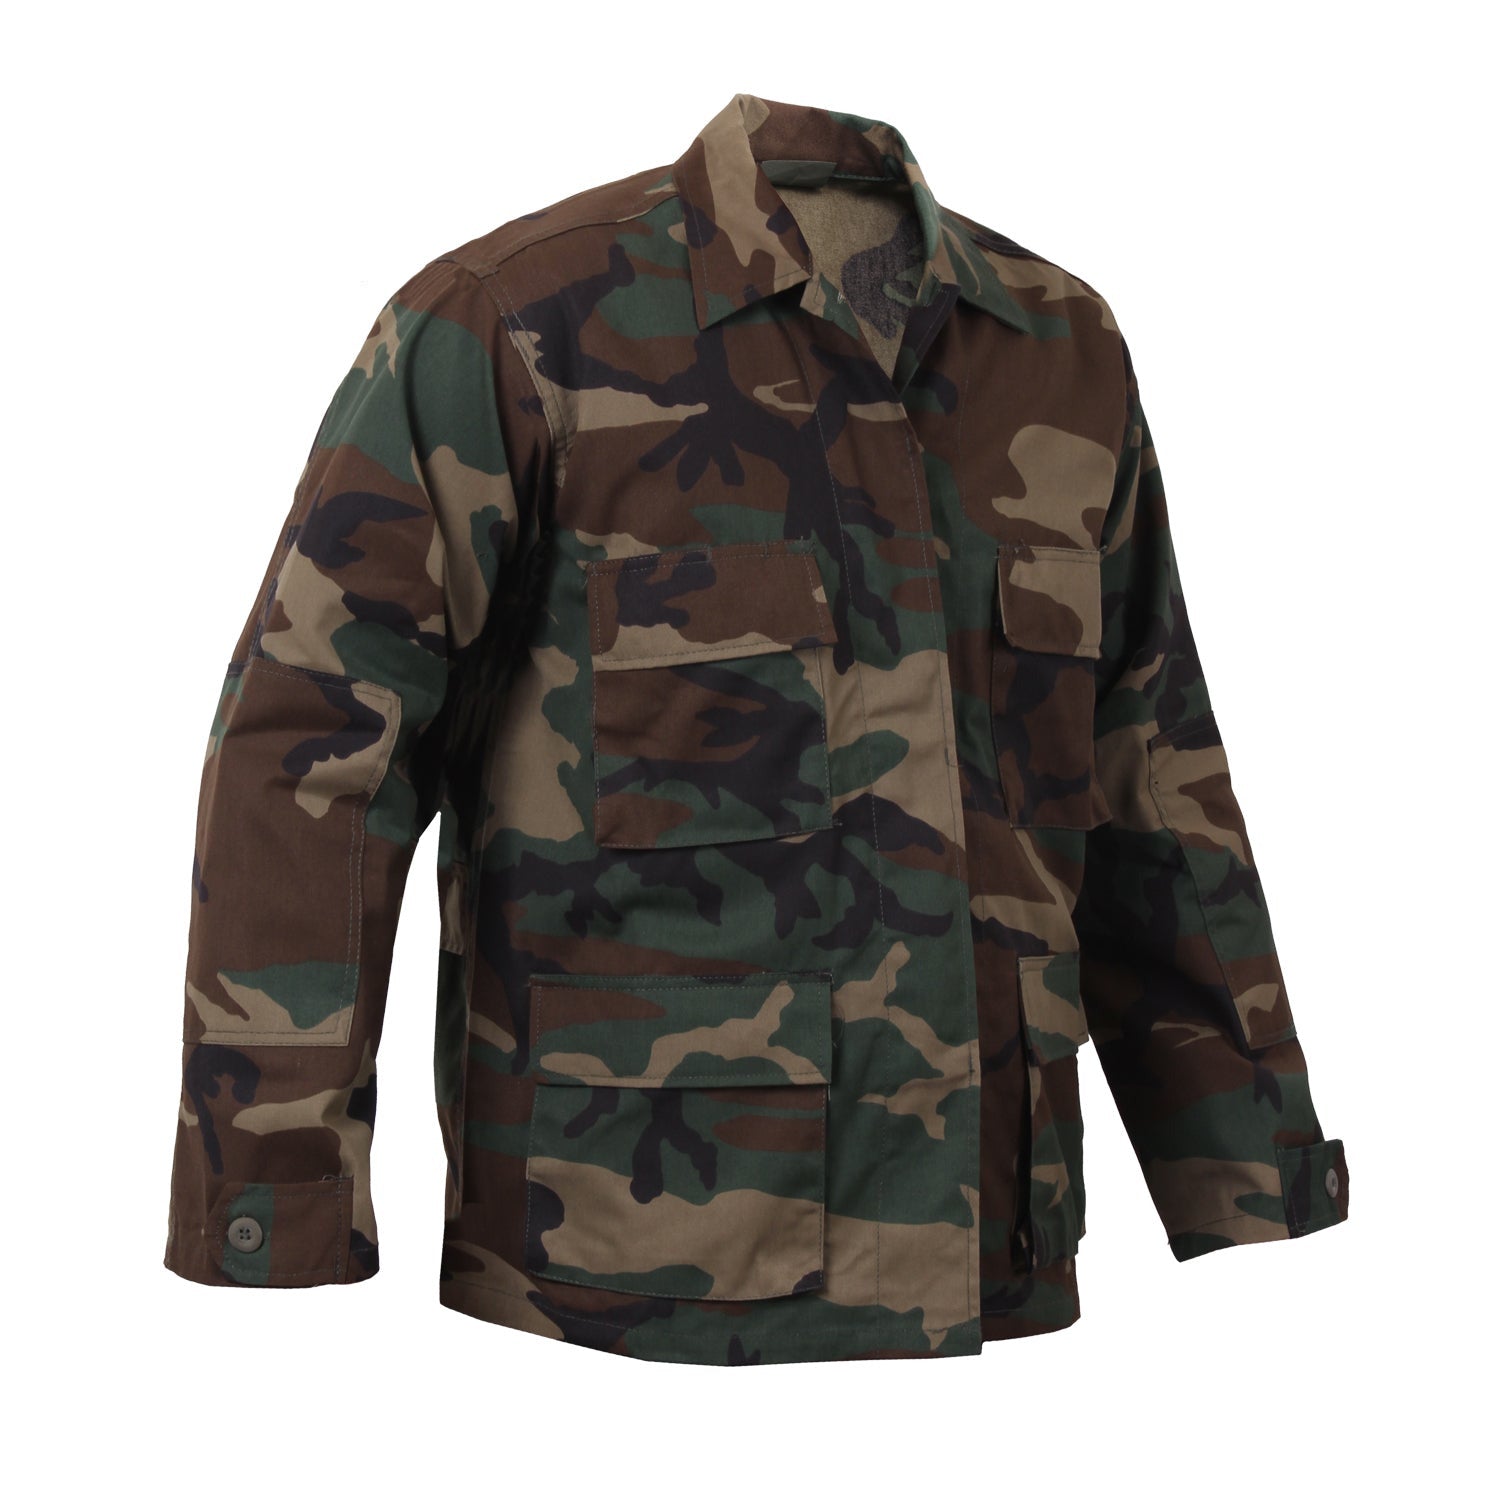 Rothco’s Camo BDU Shirts are designed for tactical use with undeniable comfort and unbeatable durability. These tactical shirts are modeled after the U.S. military’s standard issue battle dress uniform (BDU).